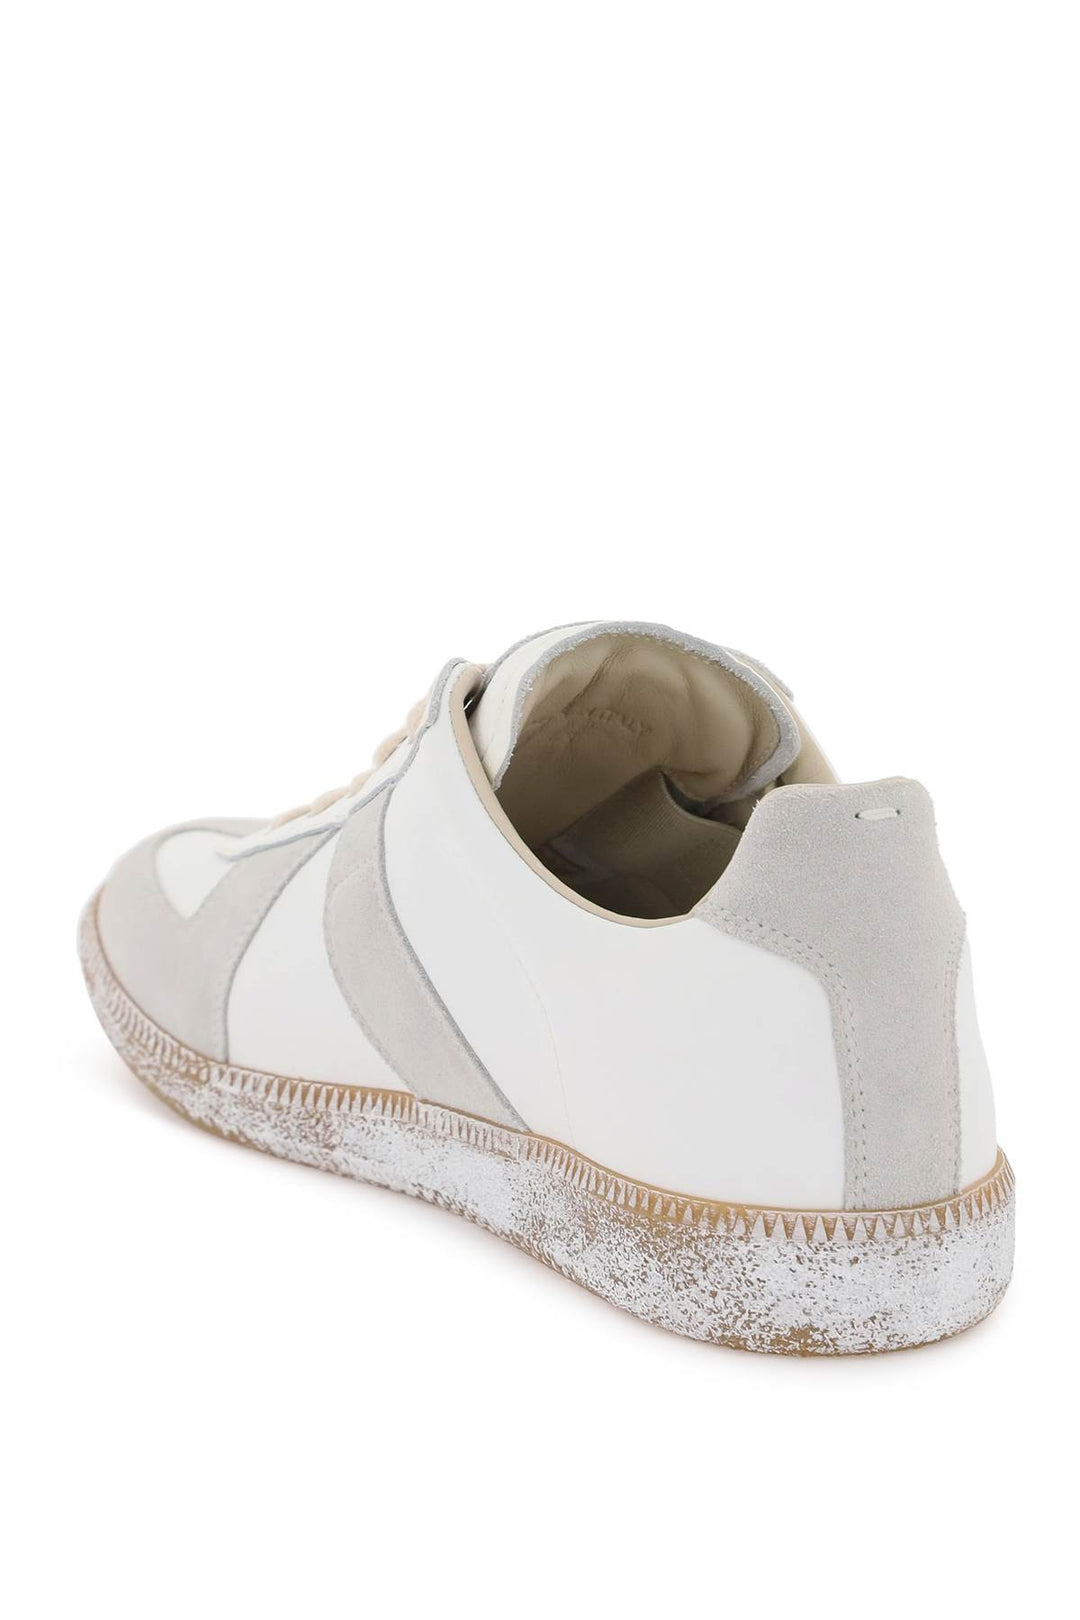 Maison Margiela Vintage Nappa And Suede Replica Sneakers In   Bianco